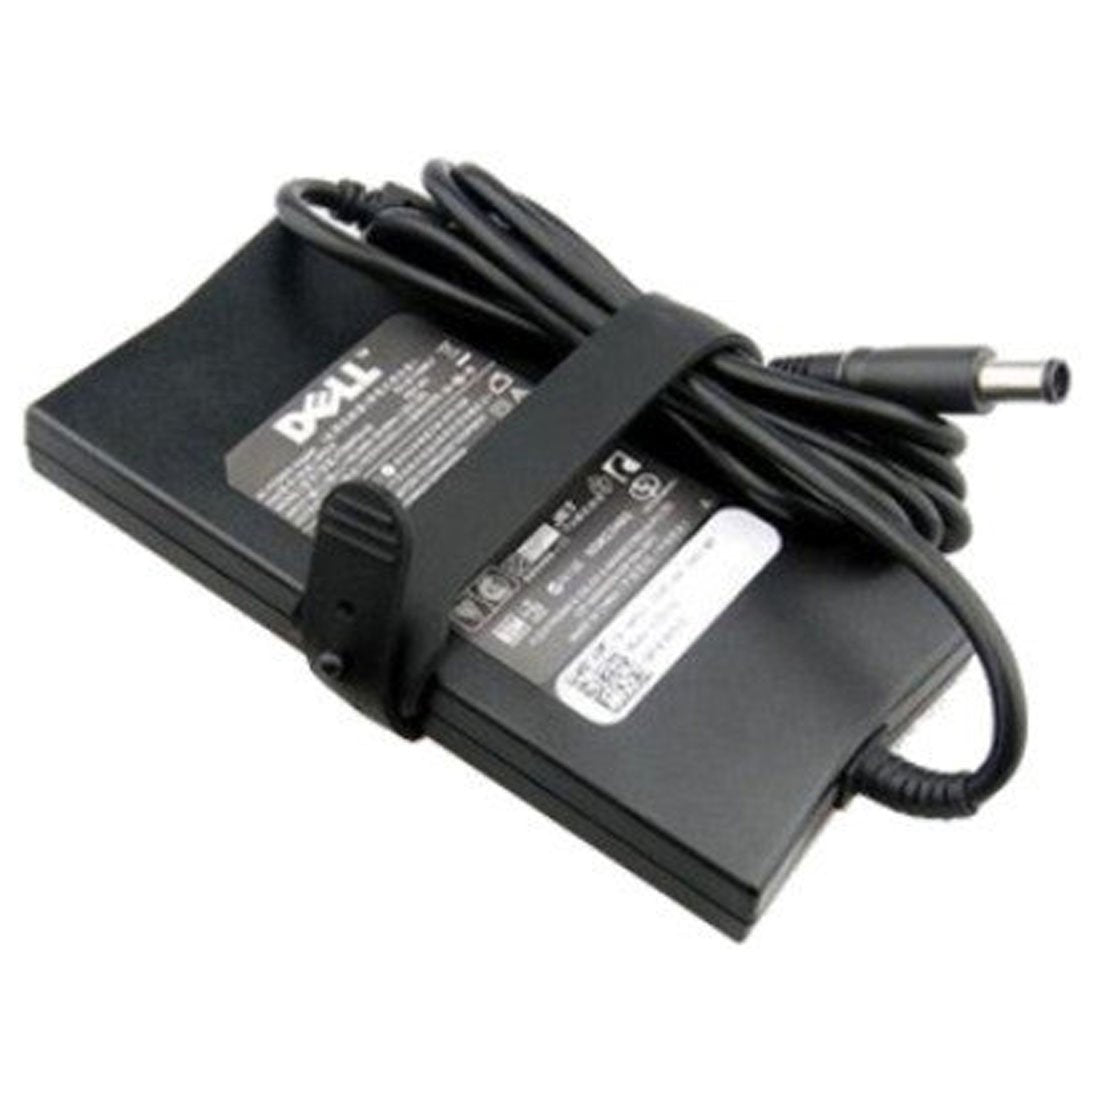 Dell Original 130W 19.5V 7.4mm Pin Laptop Charger Adapter for XPS 17 L701X With Power Cord